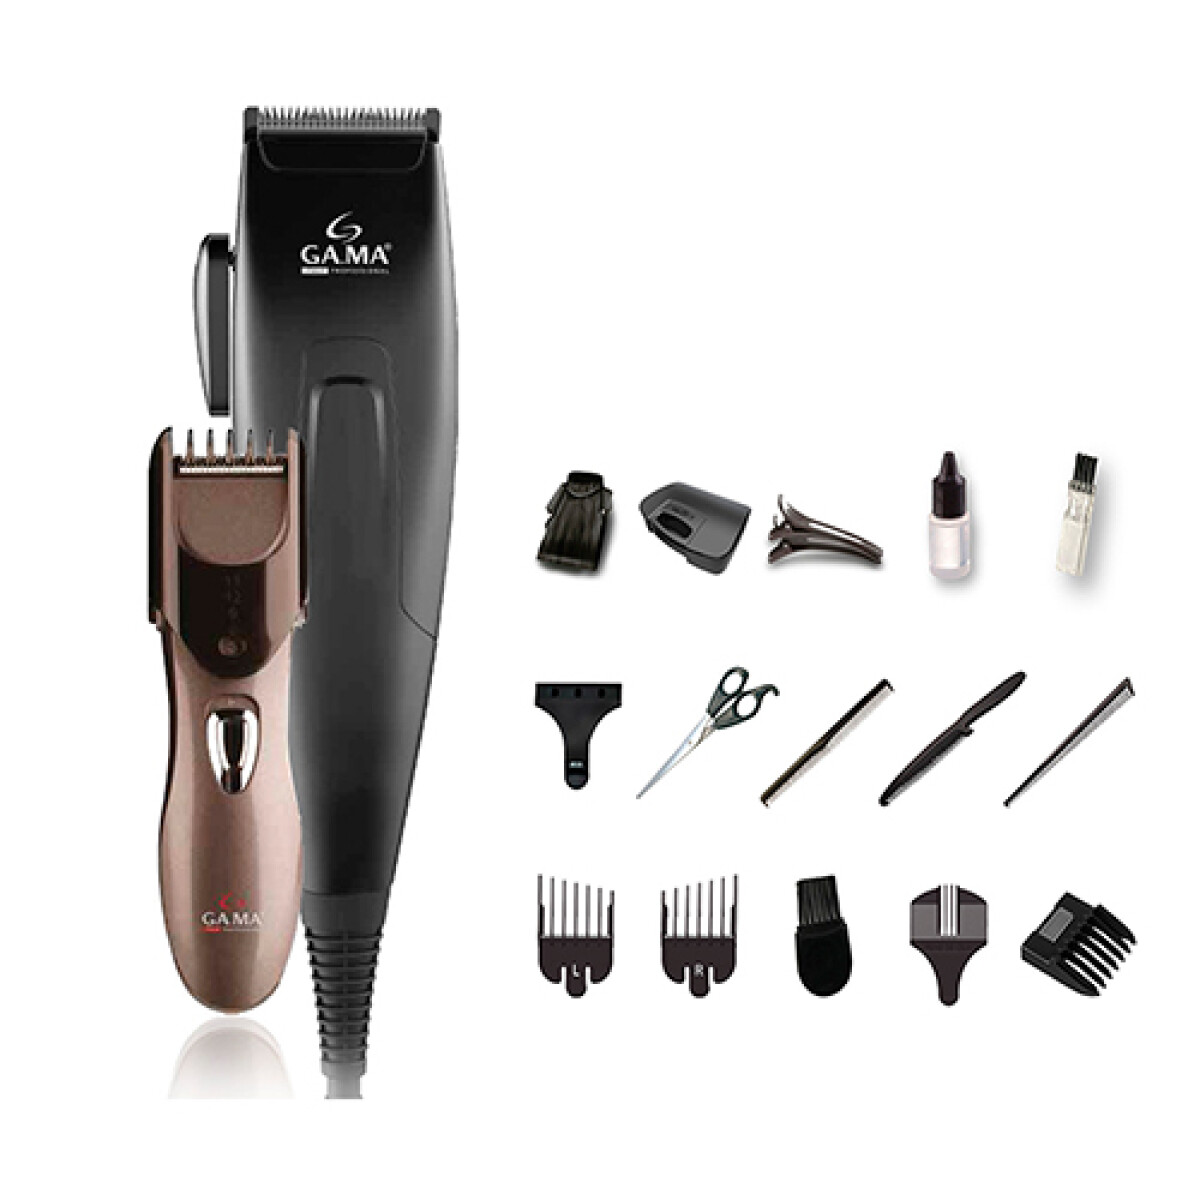 PACK GAMA Power 29- CORTAPELO GM 562 Magnético + Trimmer GT - Sin color 